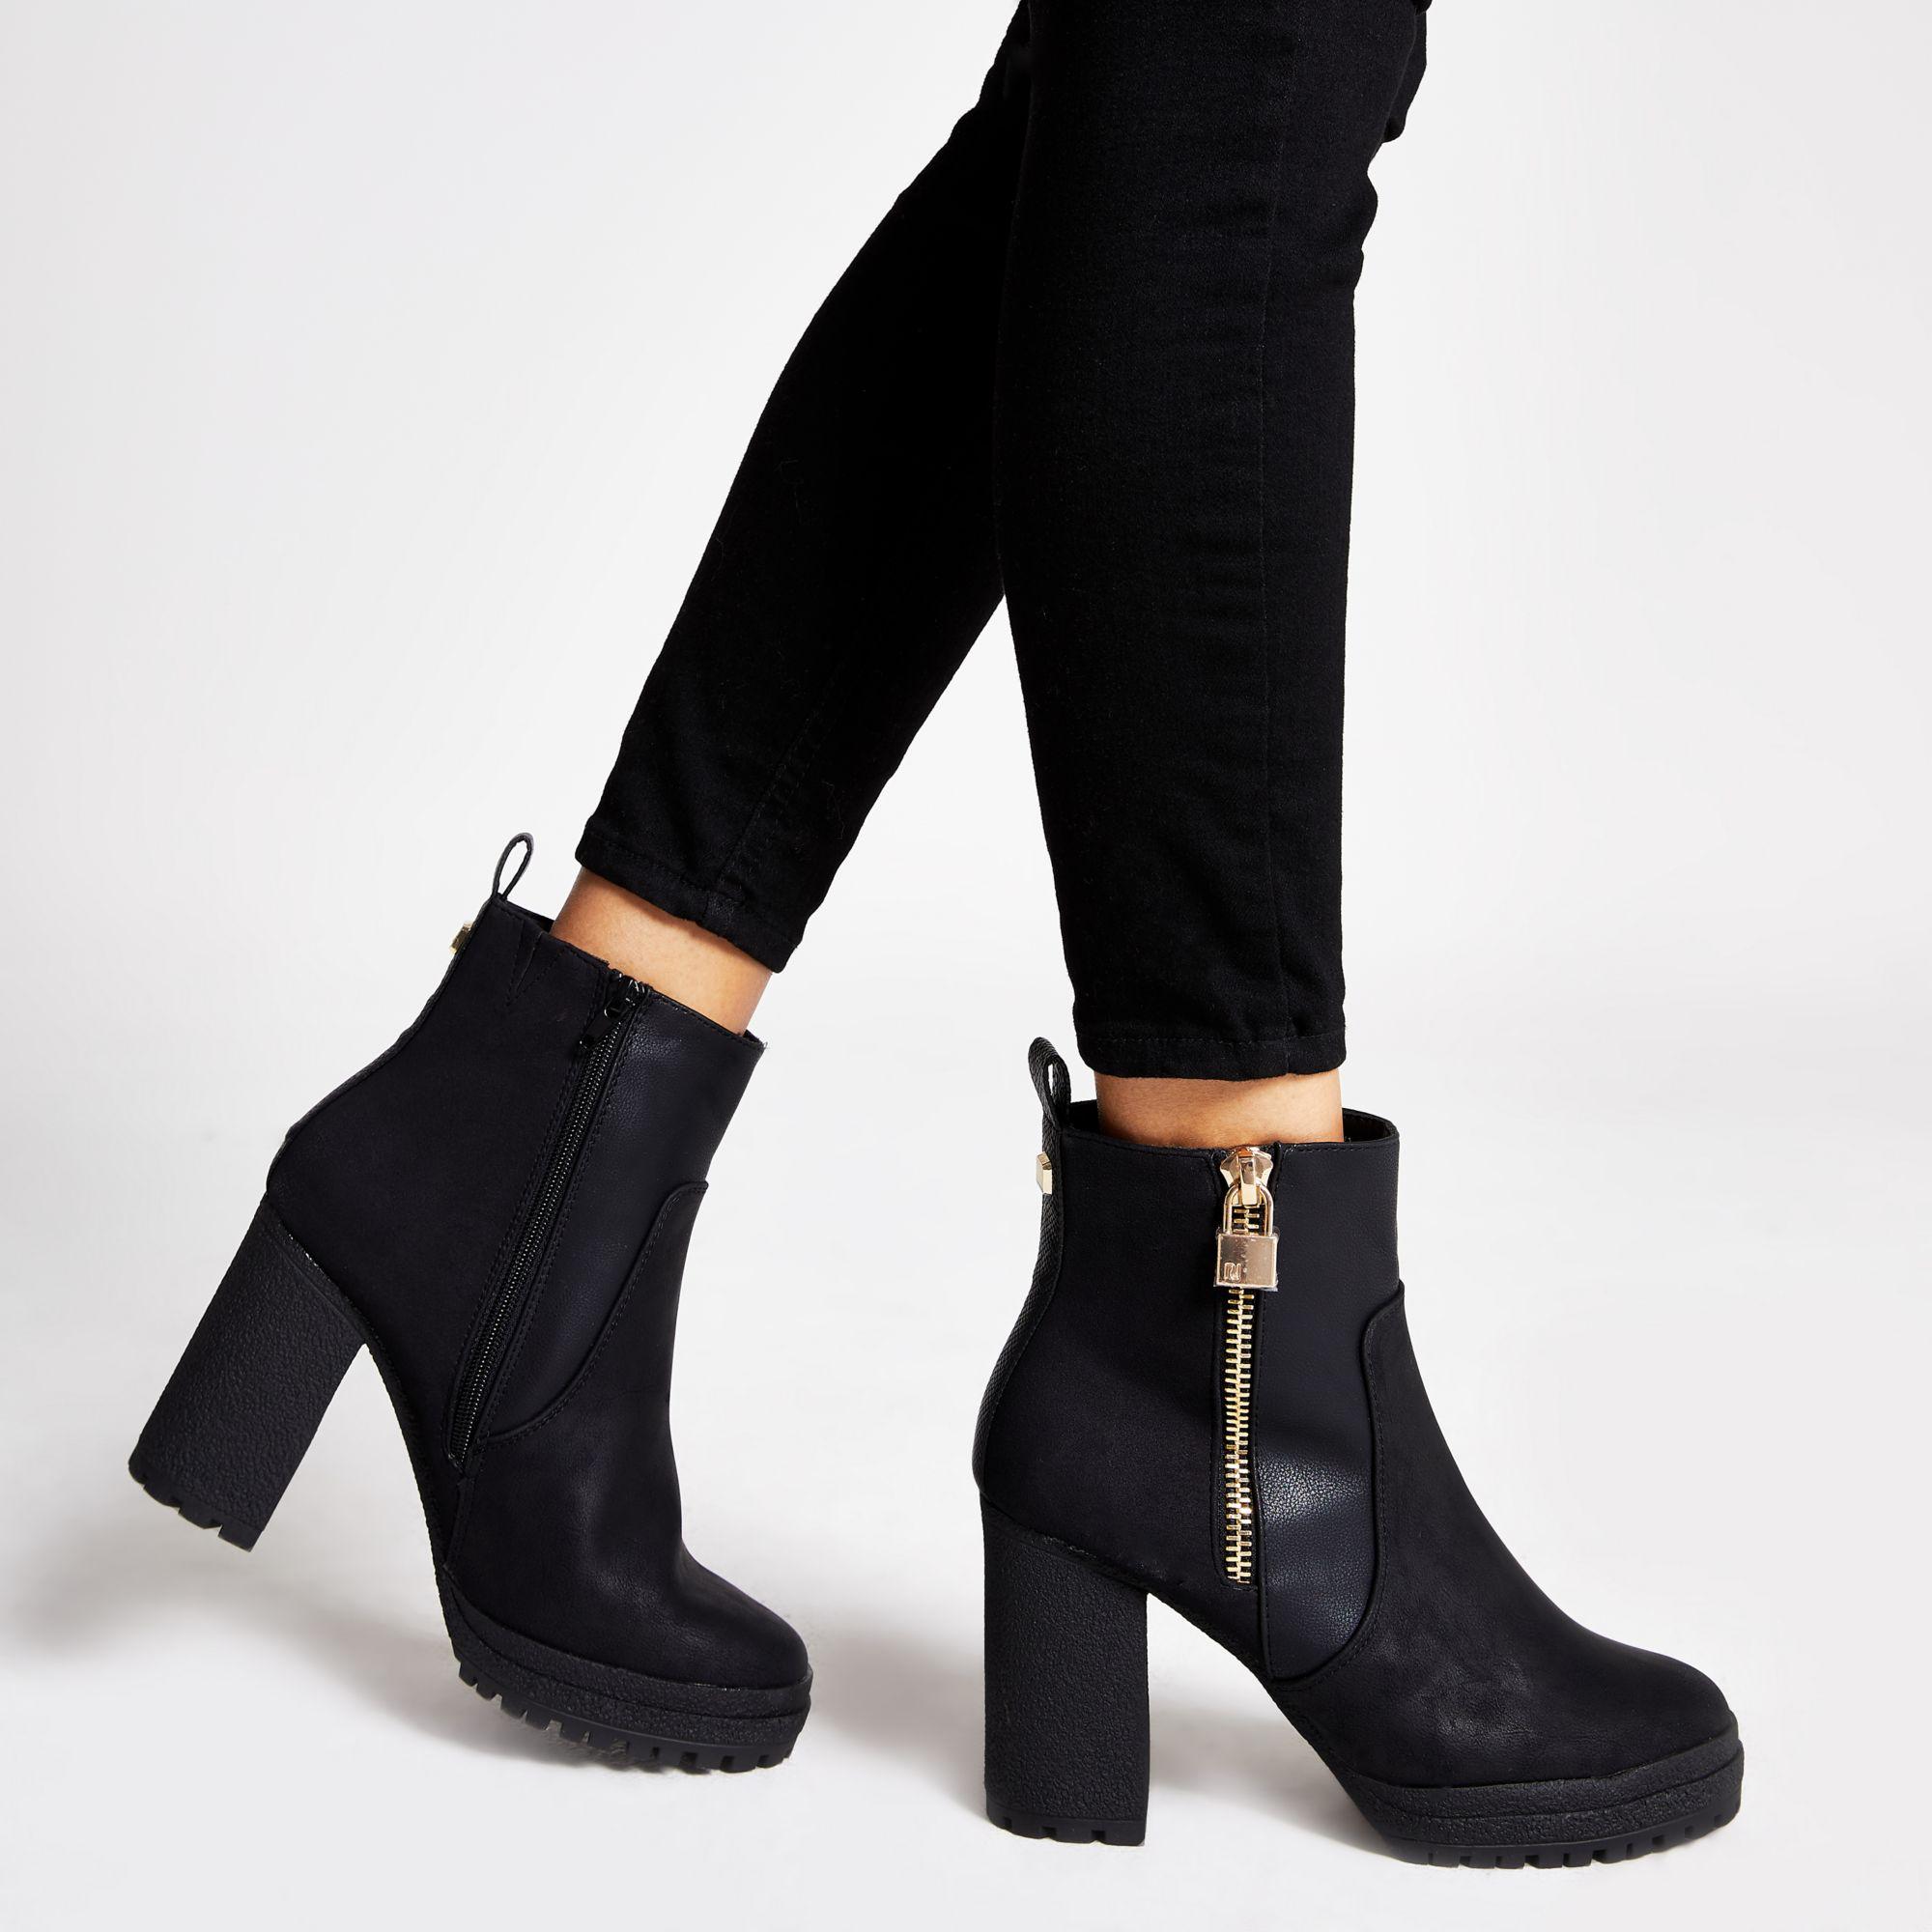 River Island Black Faux Leather Chunky Heel Ankle Boots - Lyst